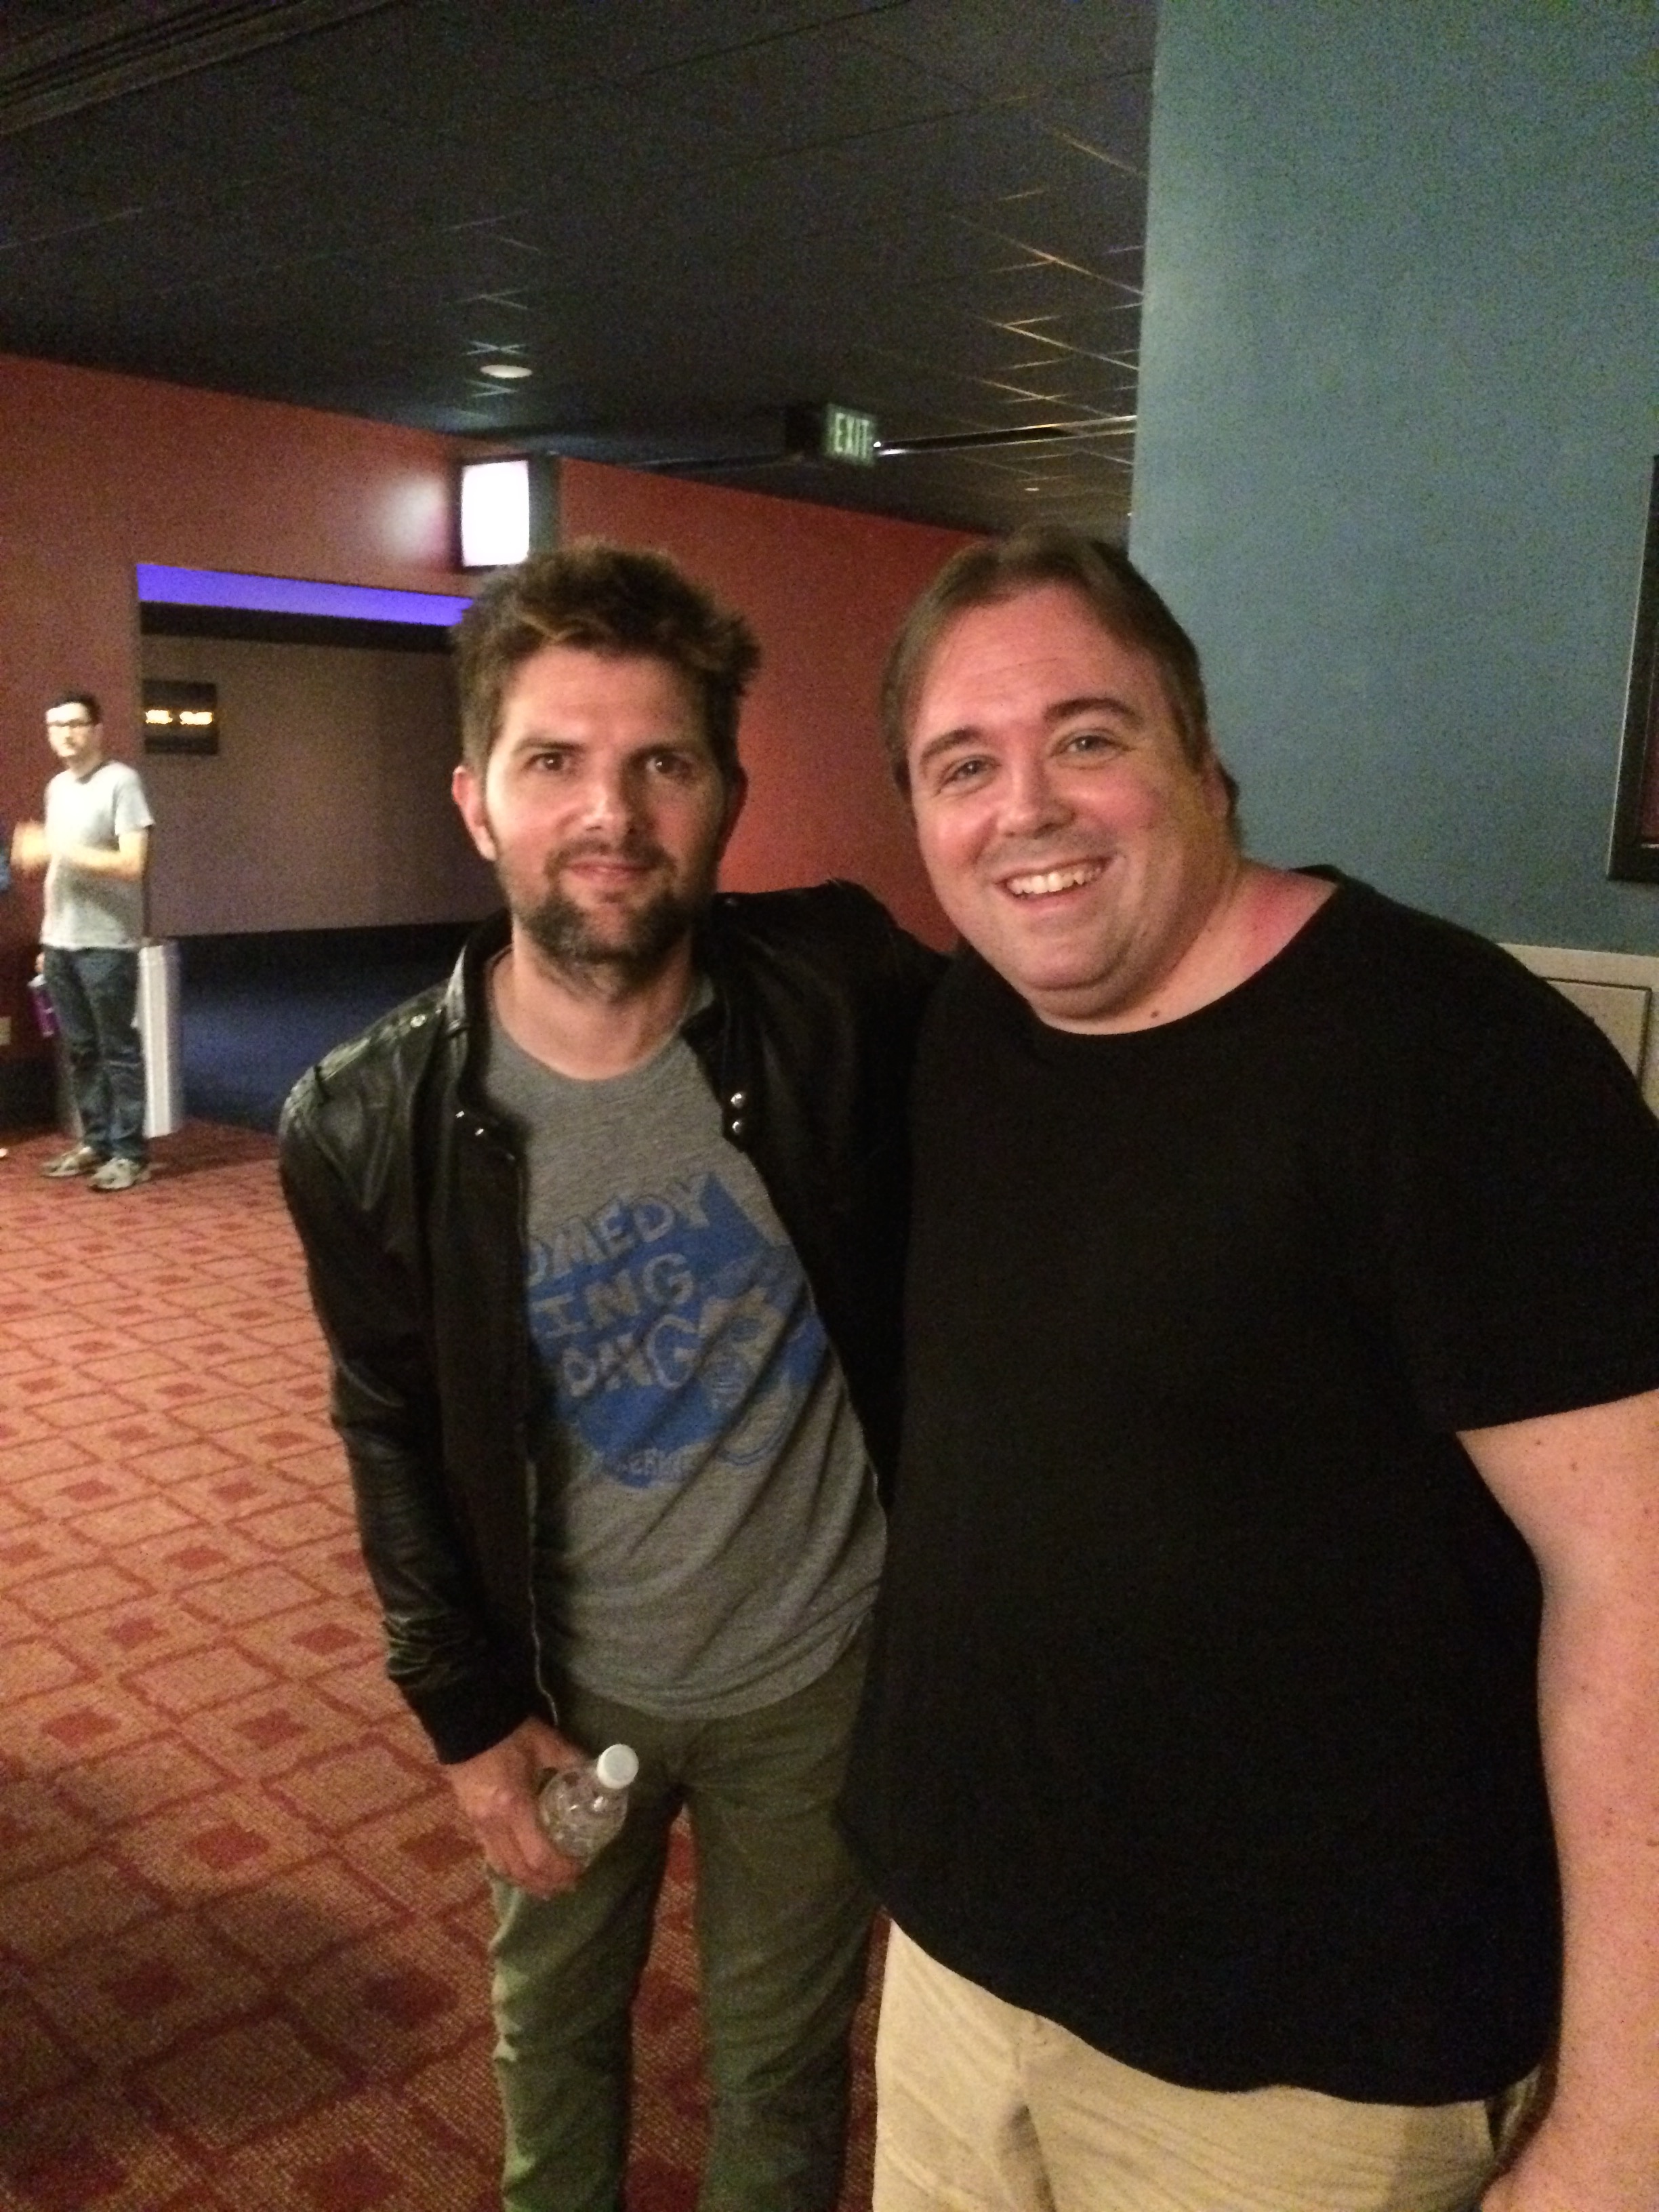 with Adam Scott, actor/producer The Overnight.